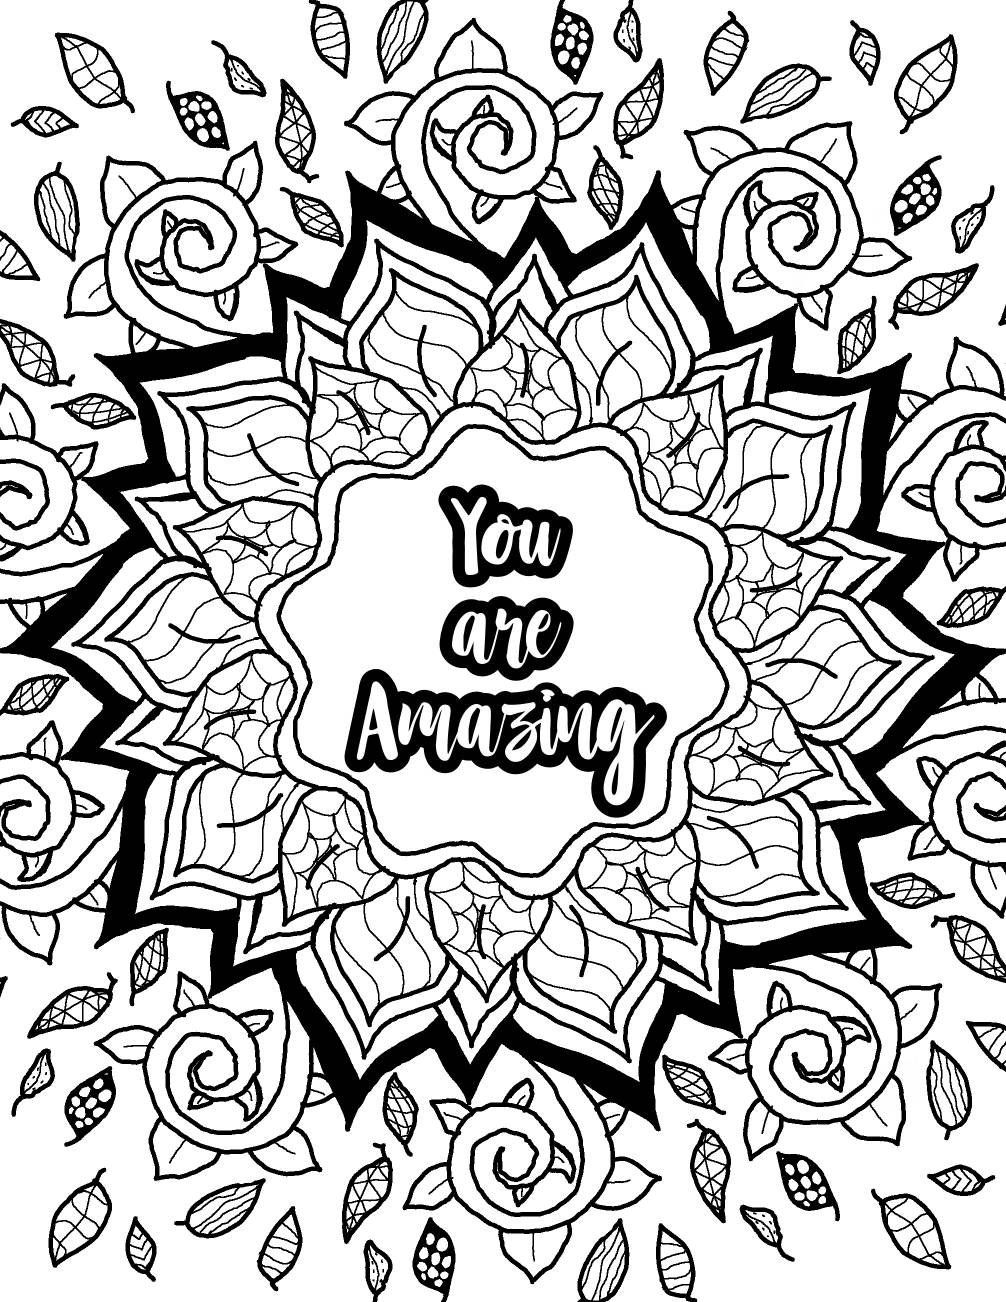 Adult coloring book, printable coloring pages, inspirational ...